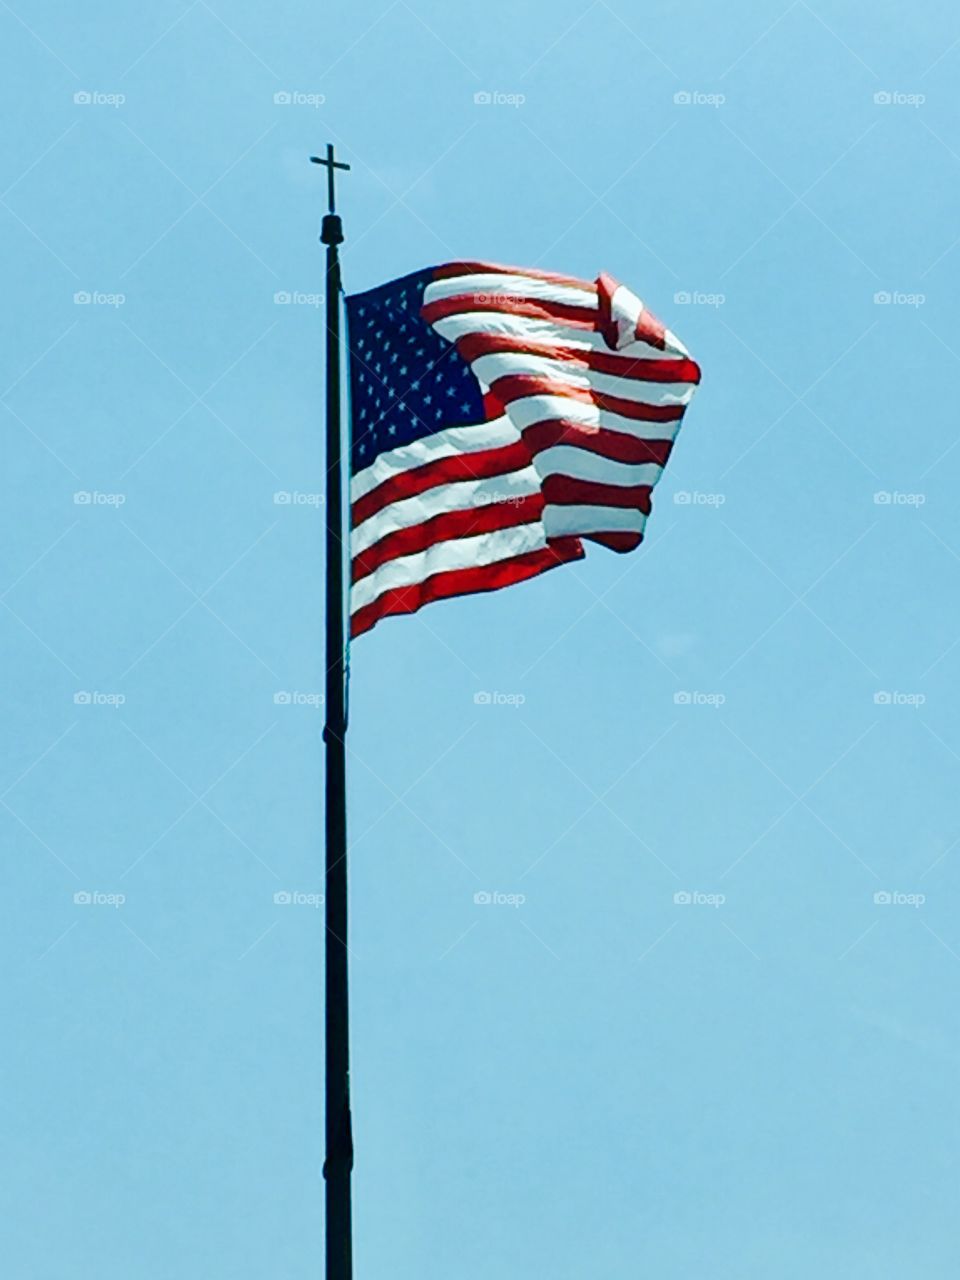 The American flag With a cross on it